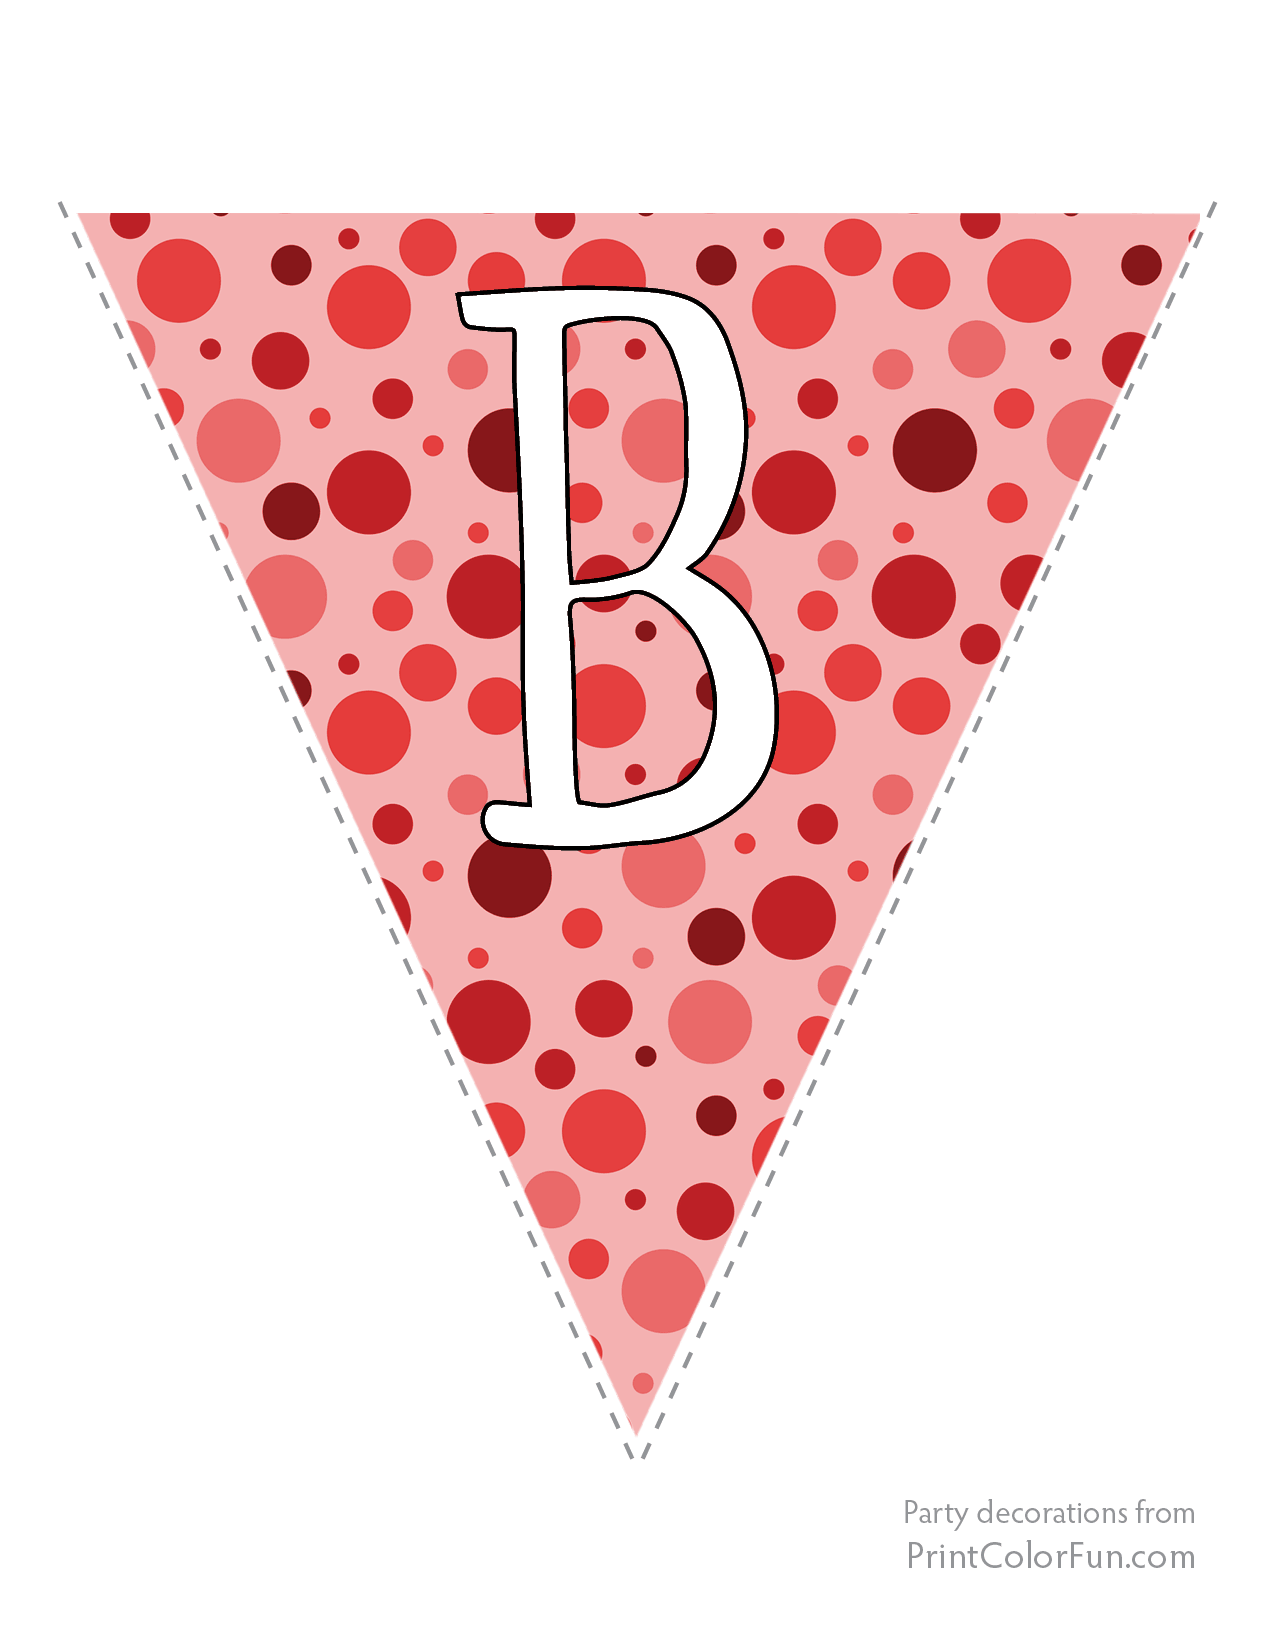 Red polka dot flags with white letters - Print Color Fun!